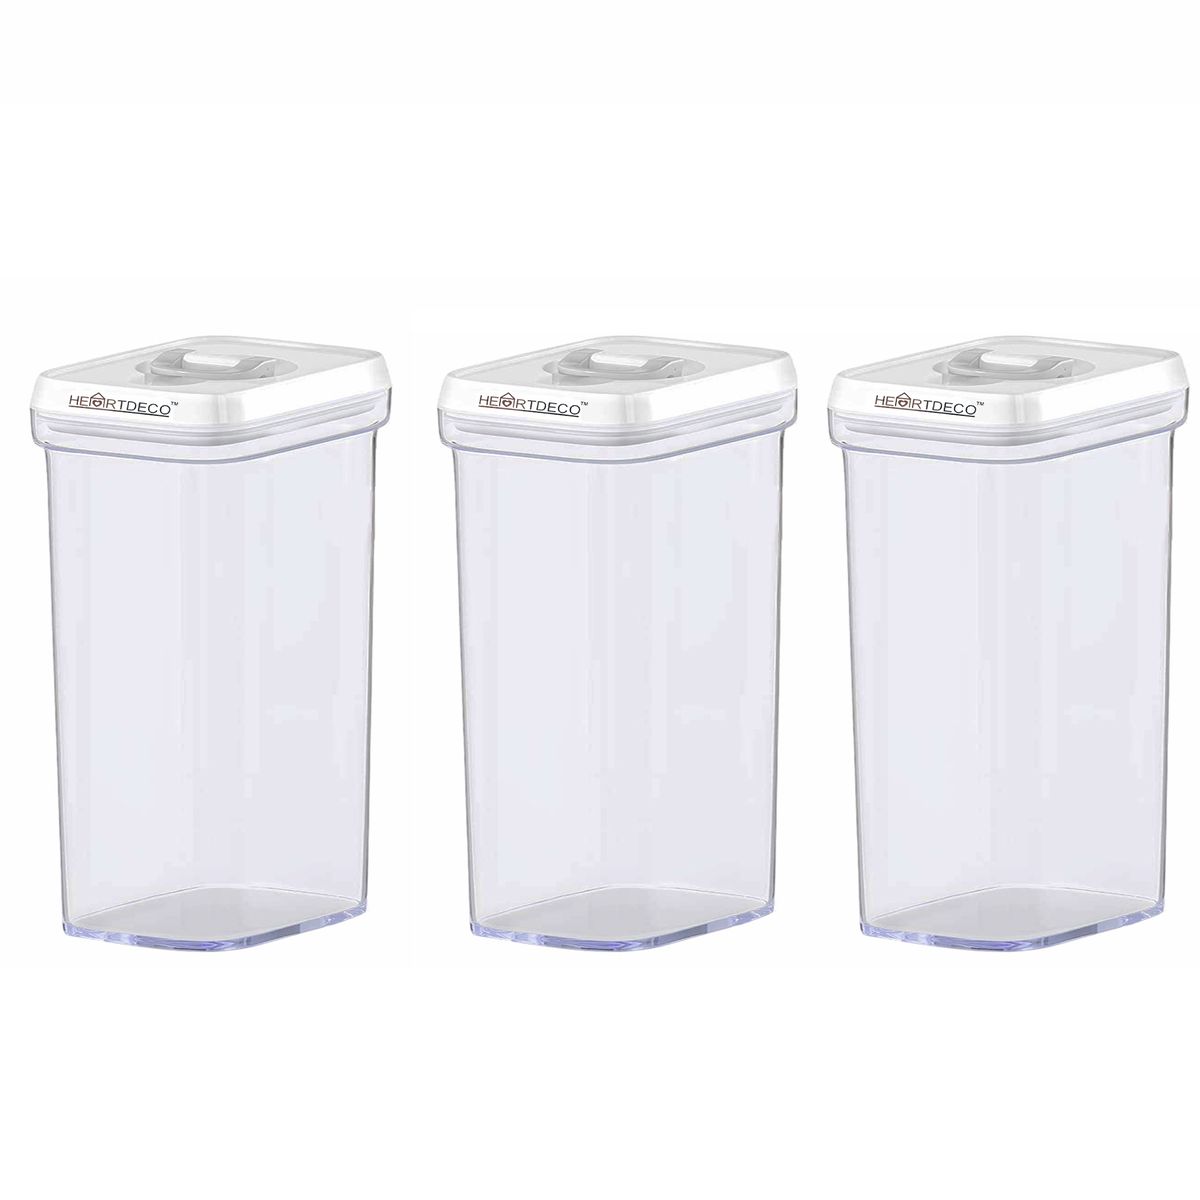 Heartdeco 1.2L Airtight Food Containers Kitchen Storage Box - Set of 3 ...